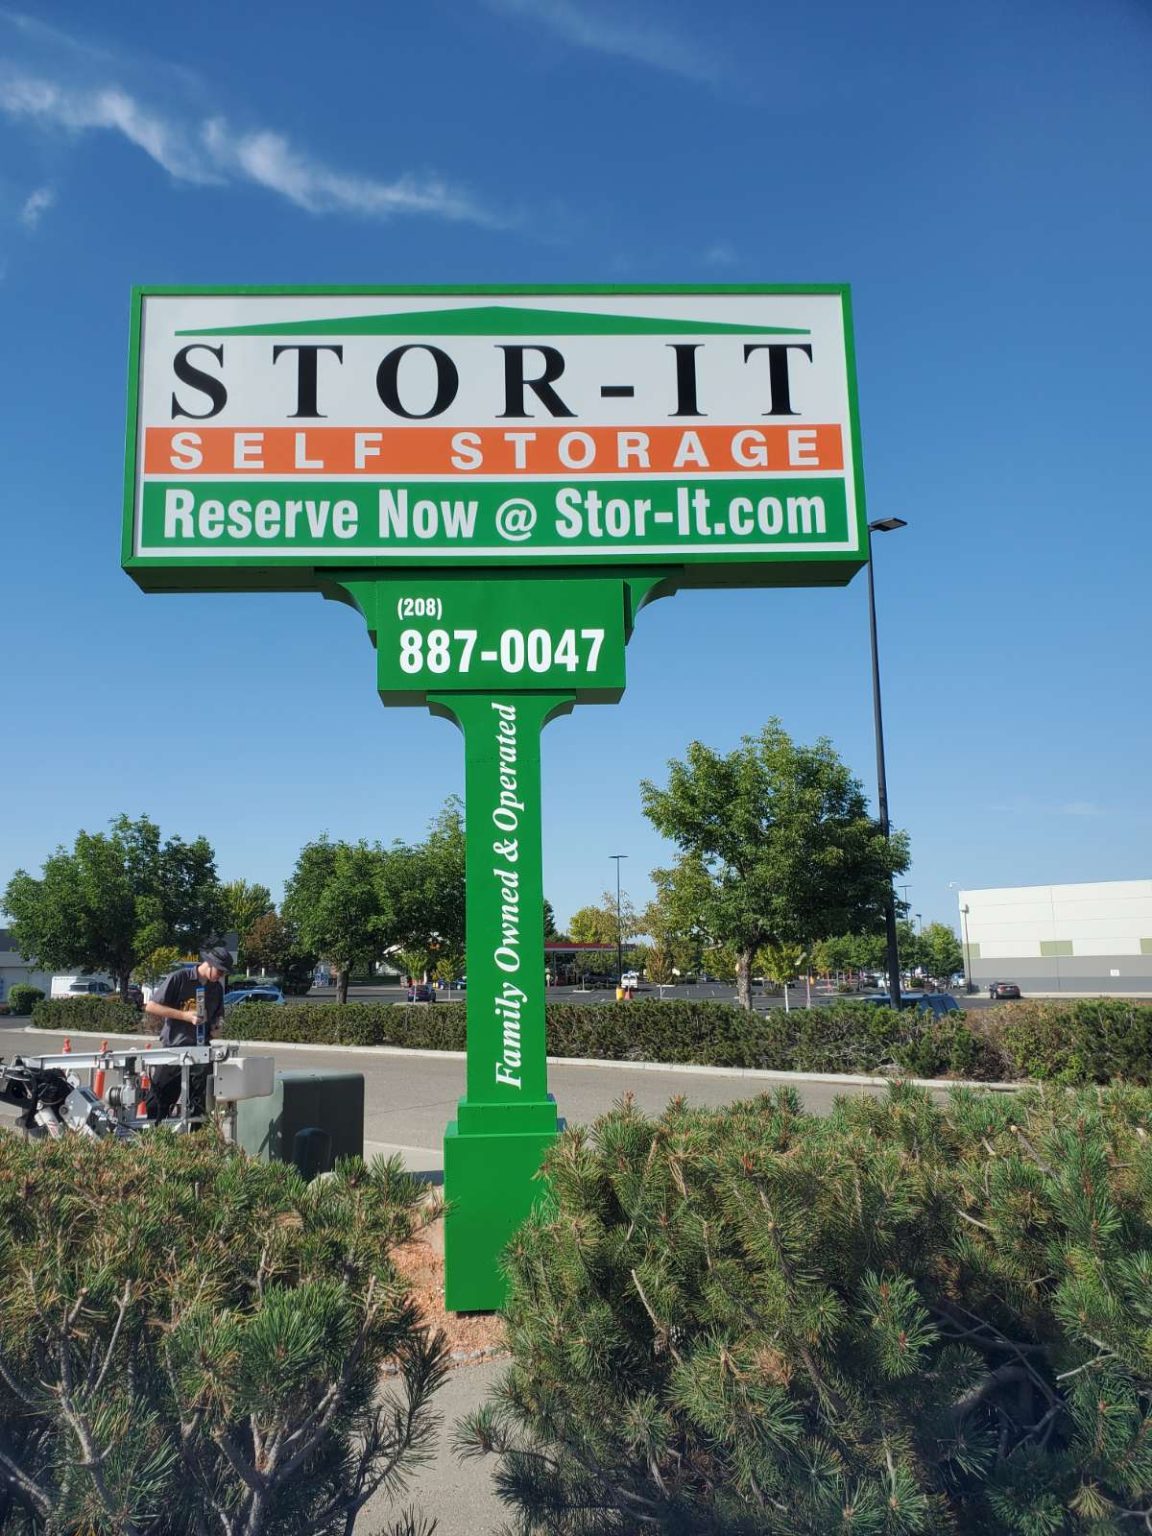 New Display for Stor-It Self Storage – Boise